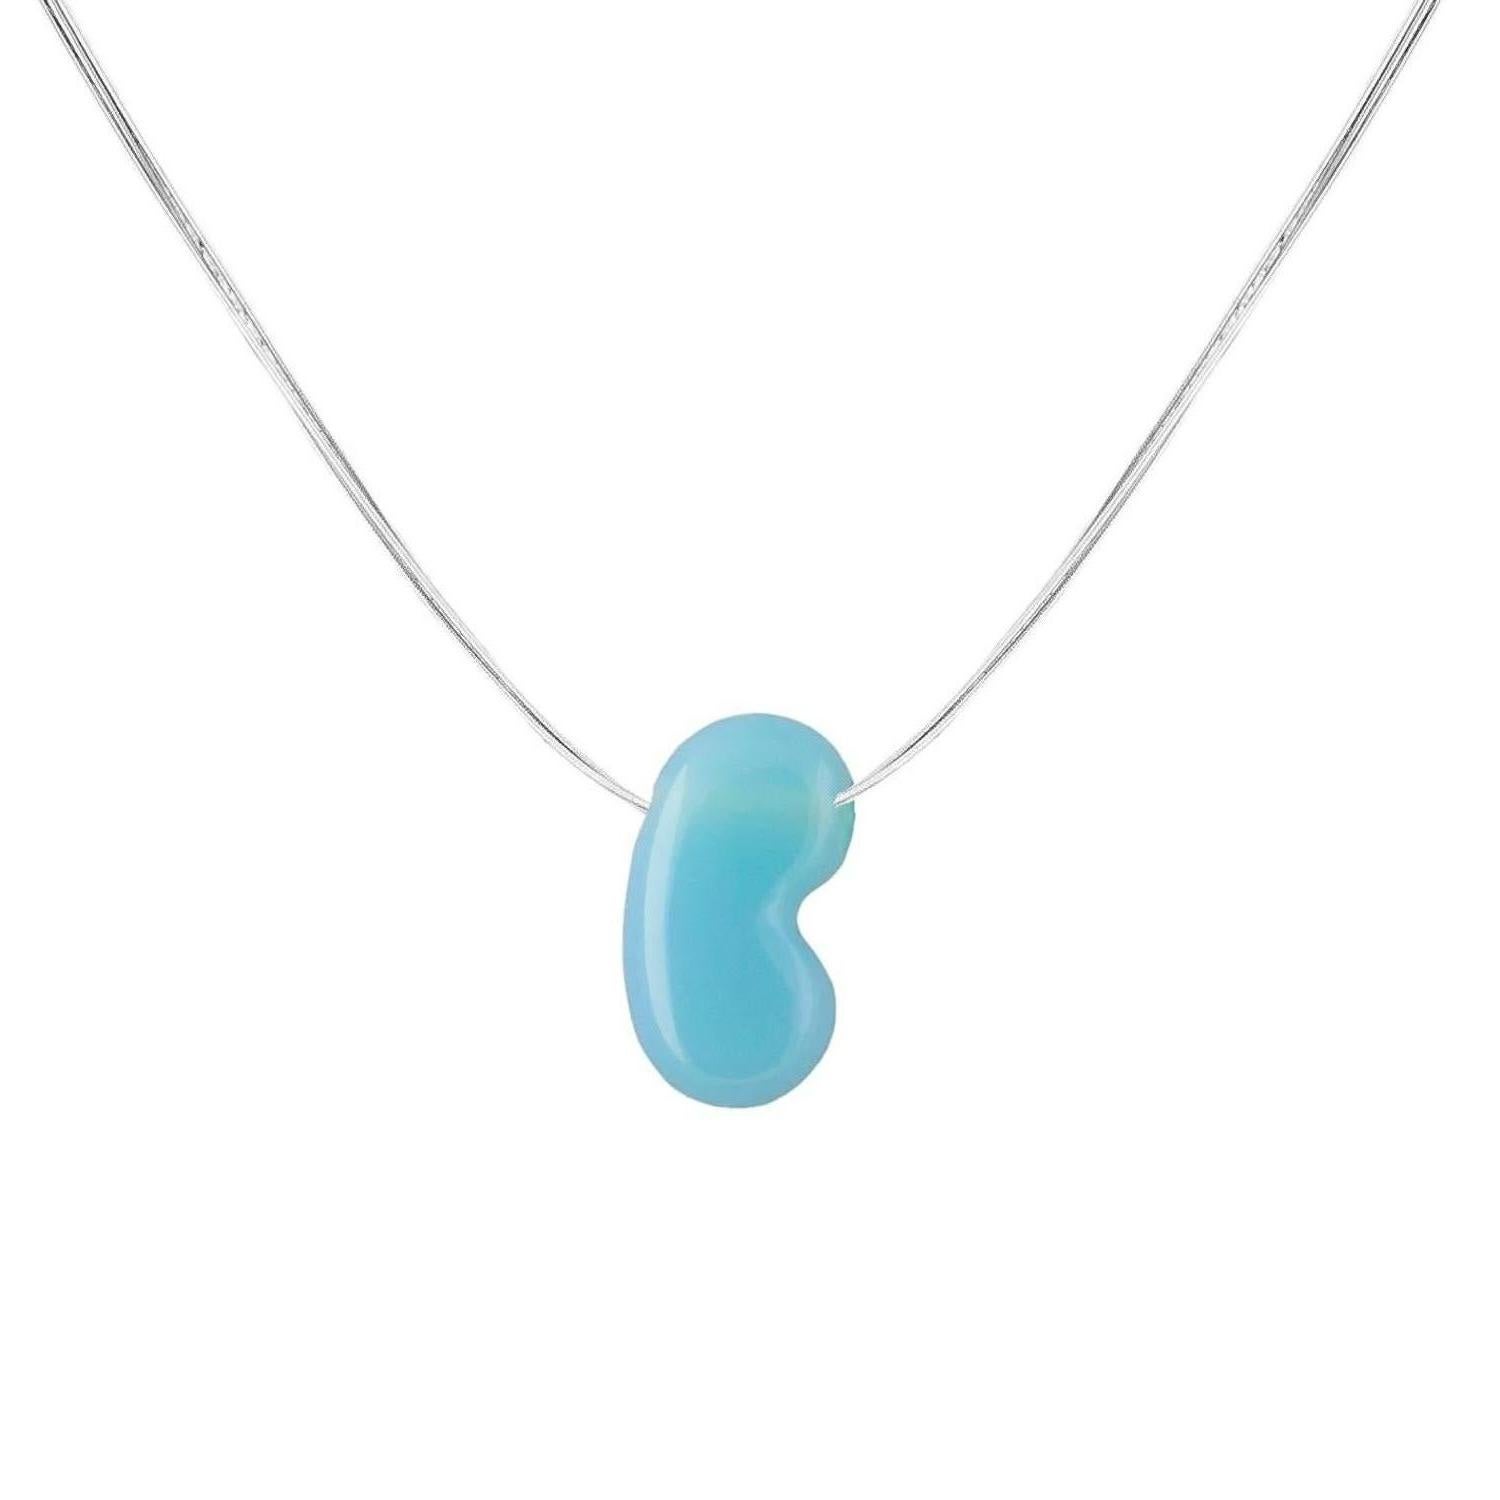 Pendant Necklace, 18 Karat White Gold with Turquoise Agate Jellybean Pendant In New Condition For Sale In Ballynahinch, Co Down